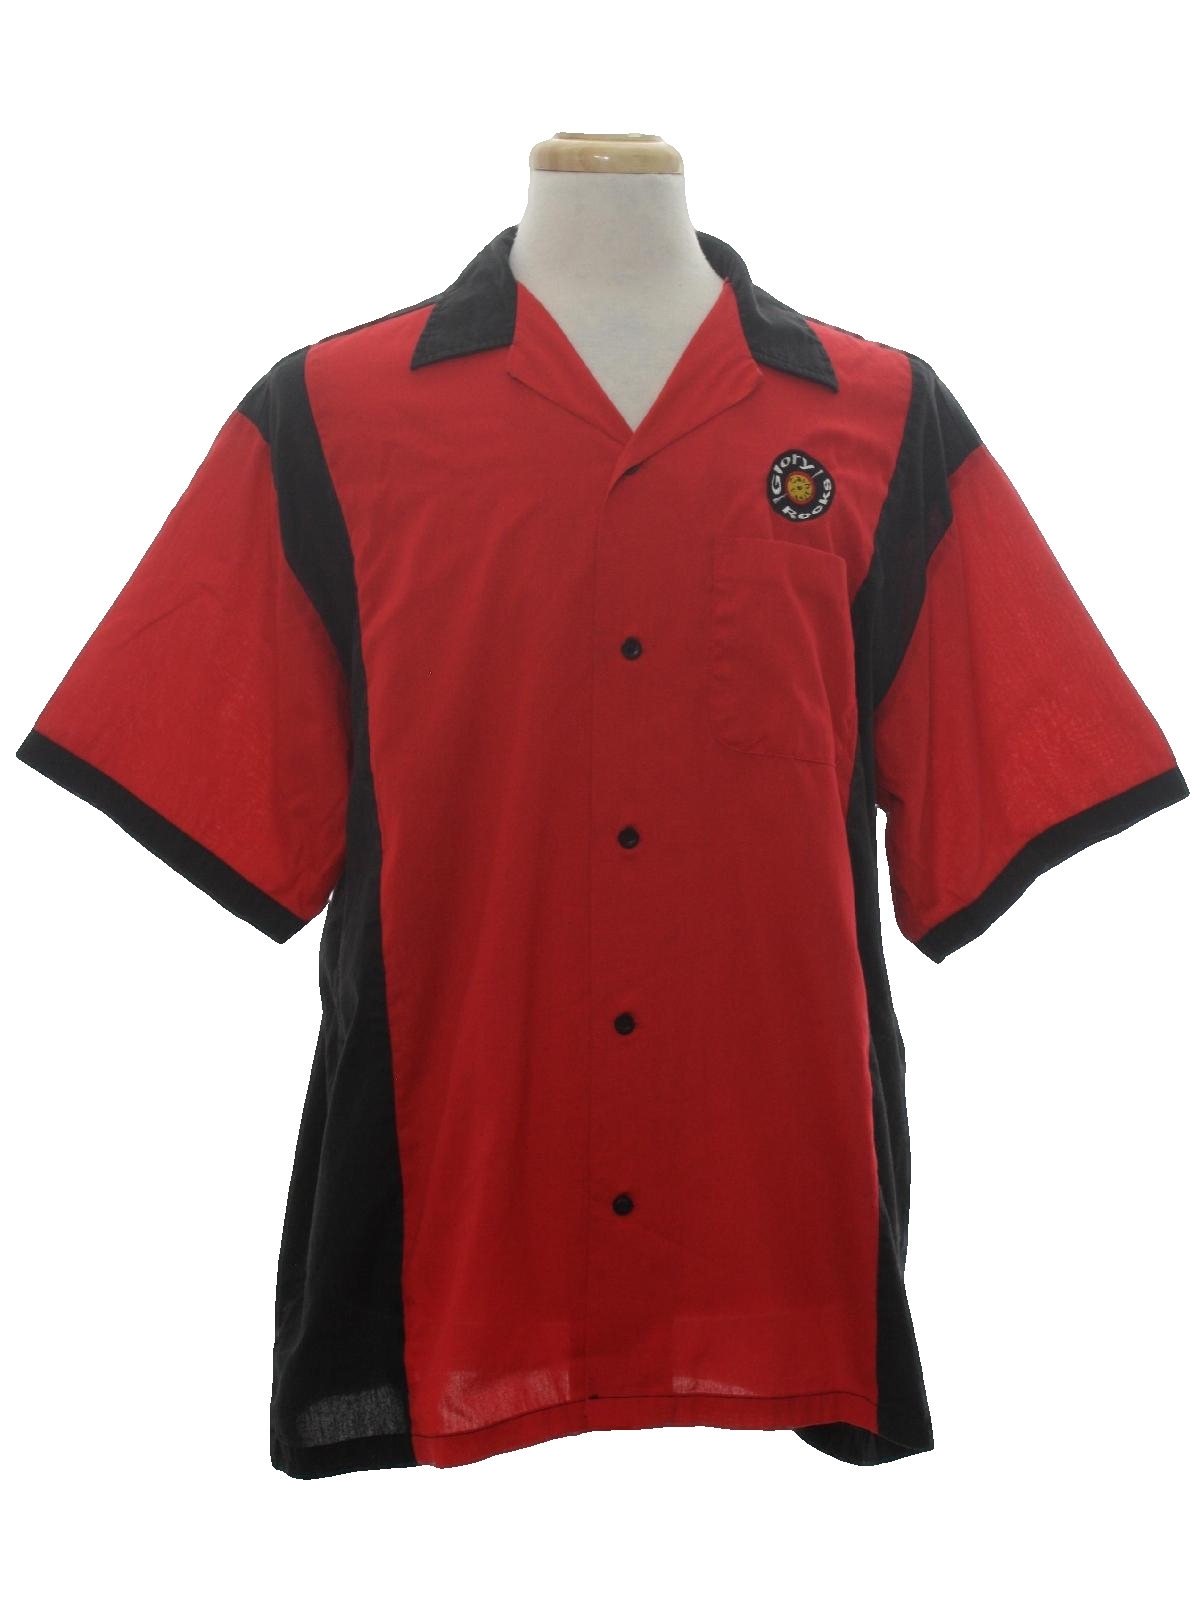 90s Bowling Shirt (Hilton): 90s -Hilton- Mens black and red background ...